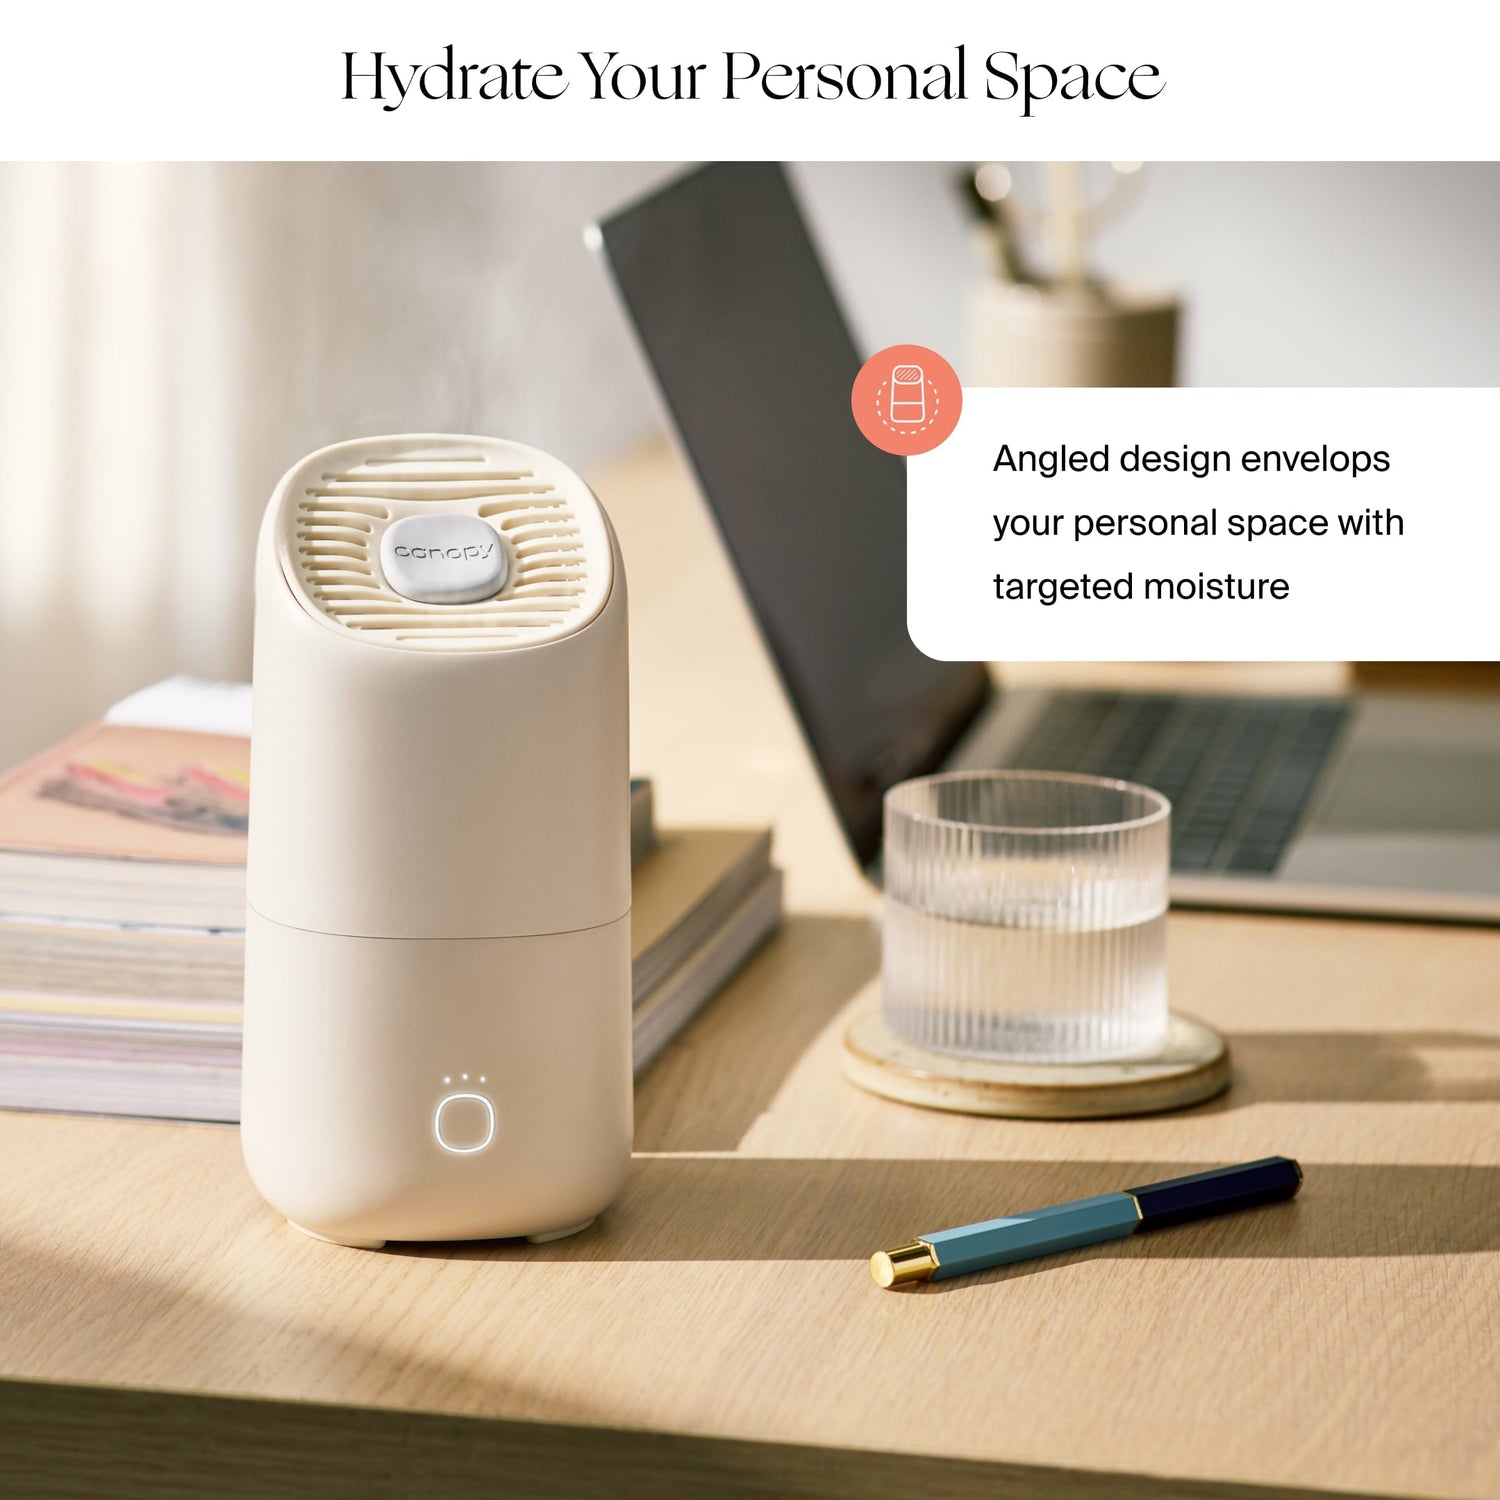 Portable Humidifier Duo | Lifestyle, Hydrate Your Personal Space